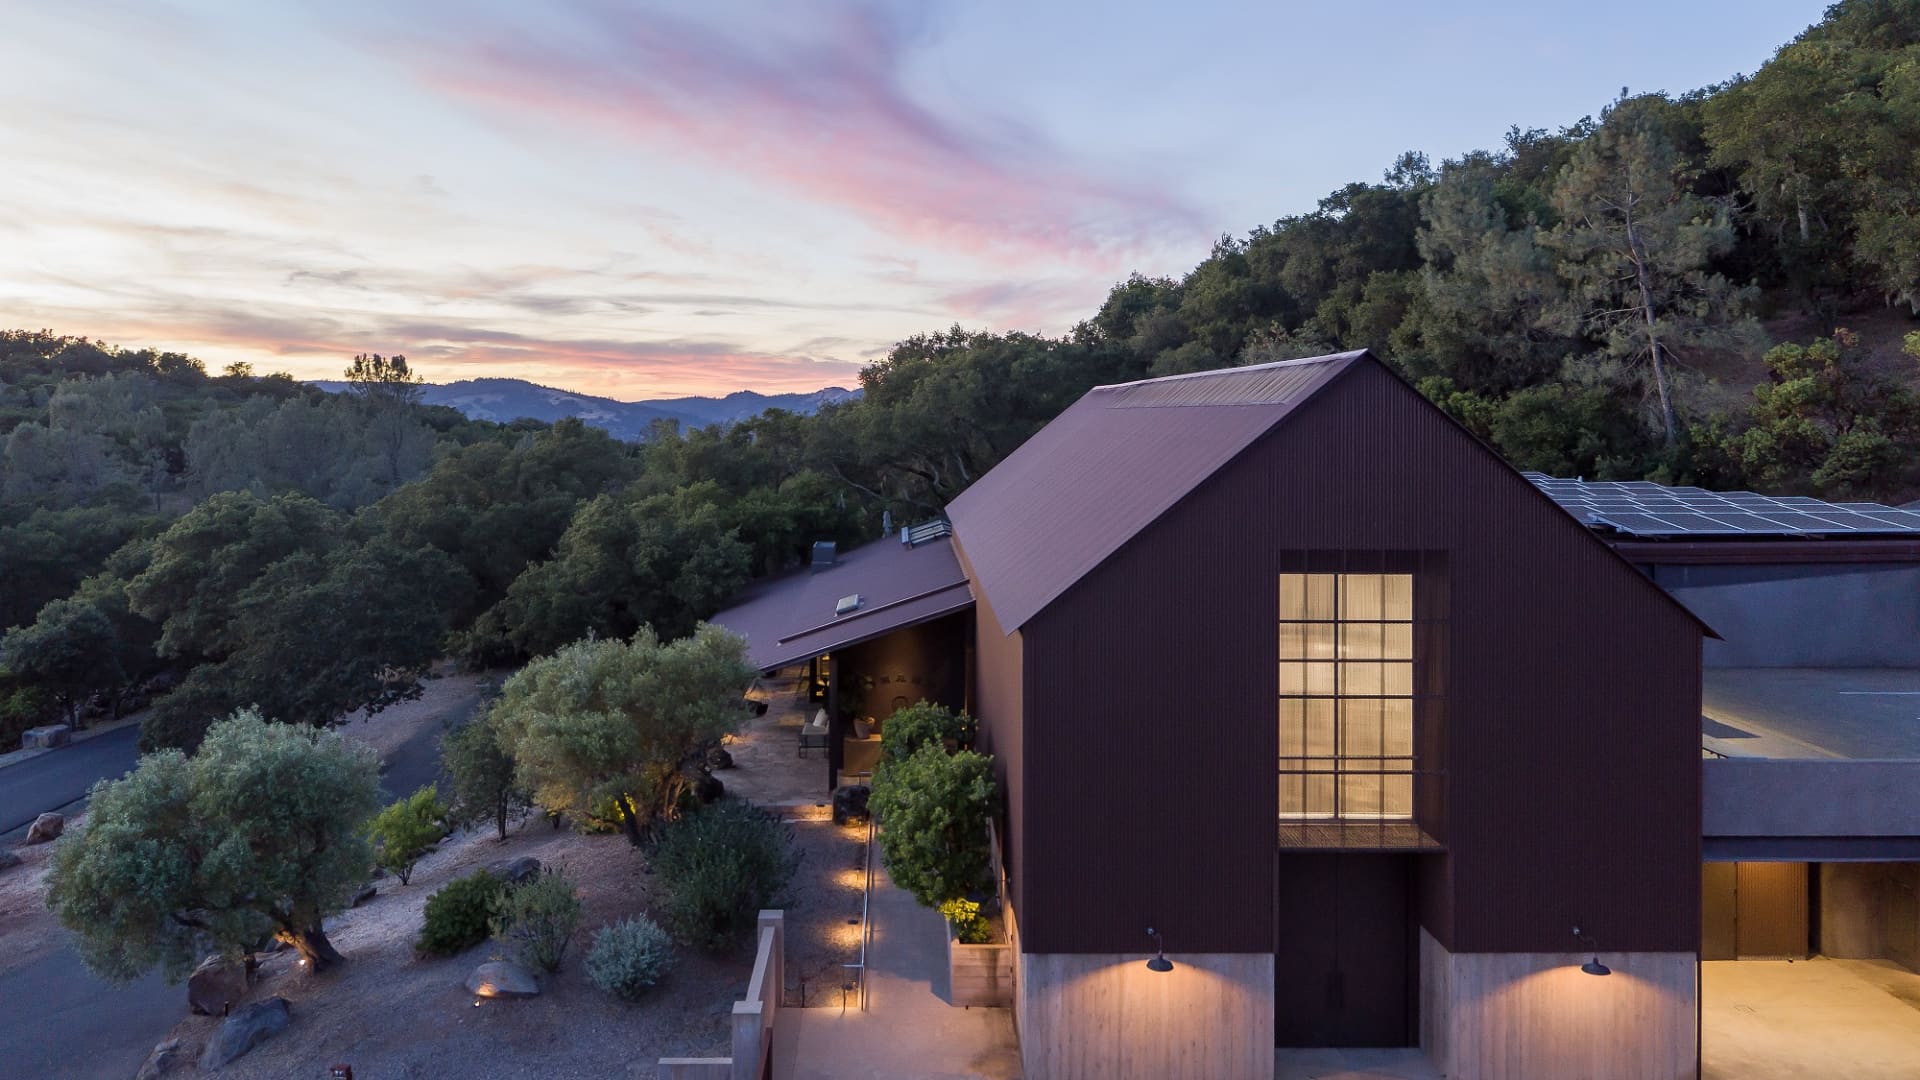 Brand features a winery and 15 planted acres of grapes on a 110-acre Napa Valley estate.